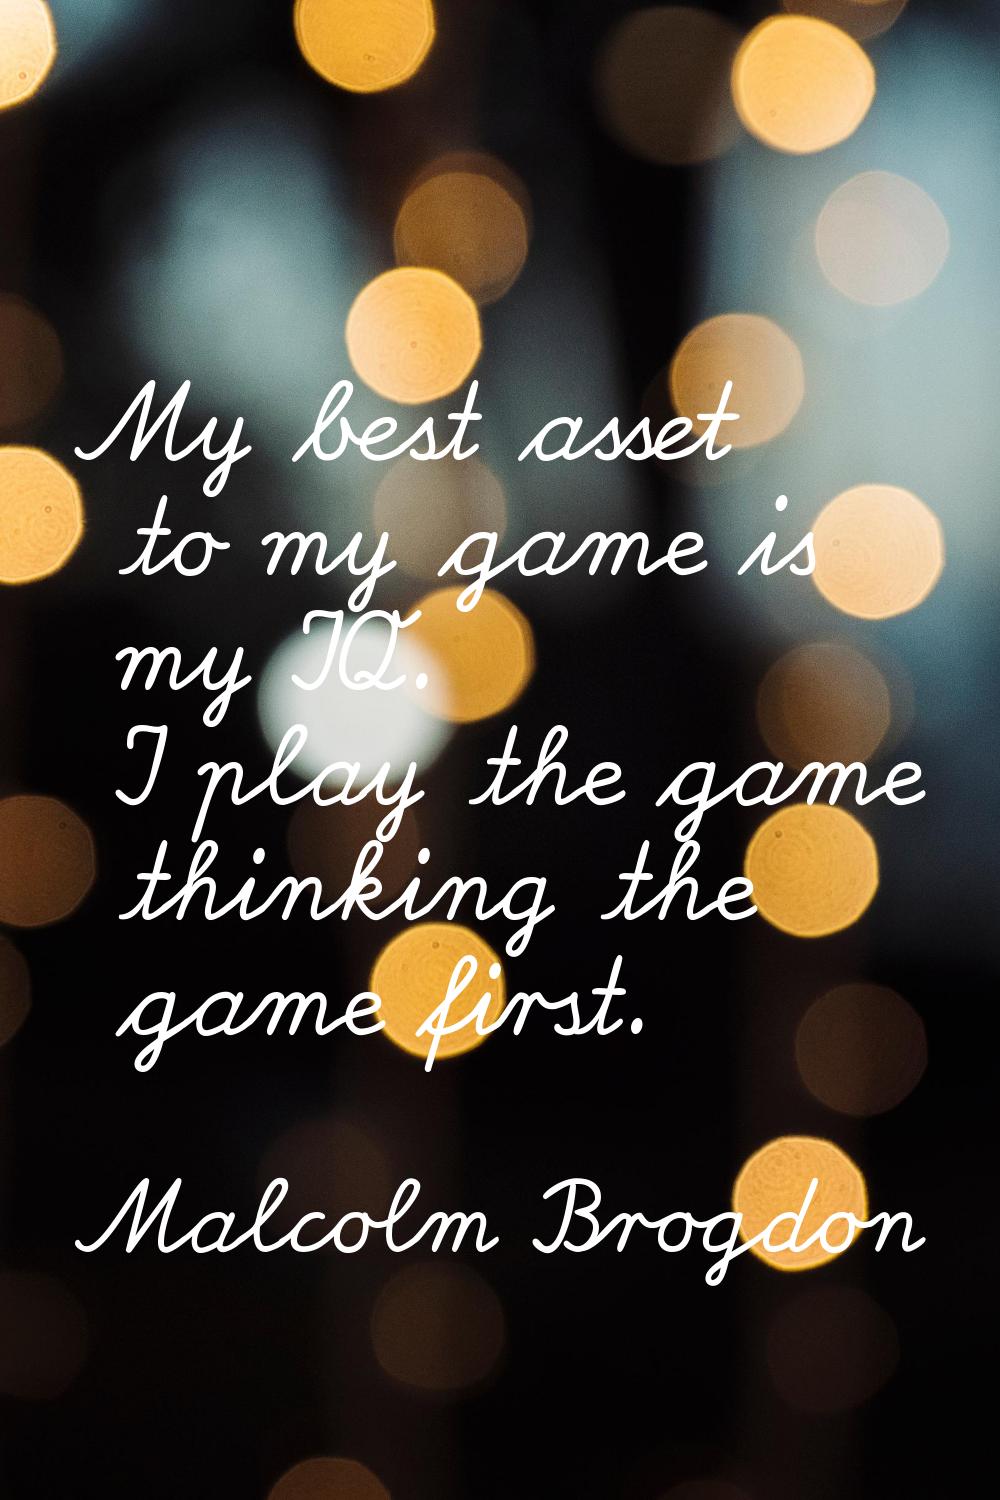 My best asset to my game is my IQ. I play the game thinking the game first.